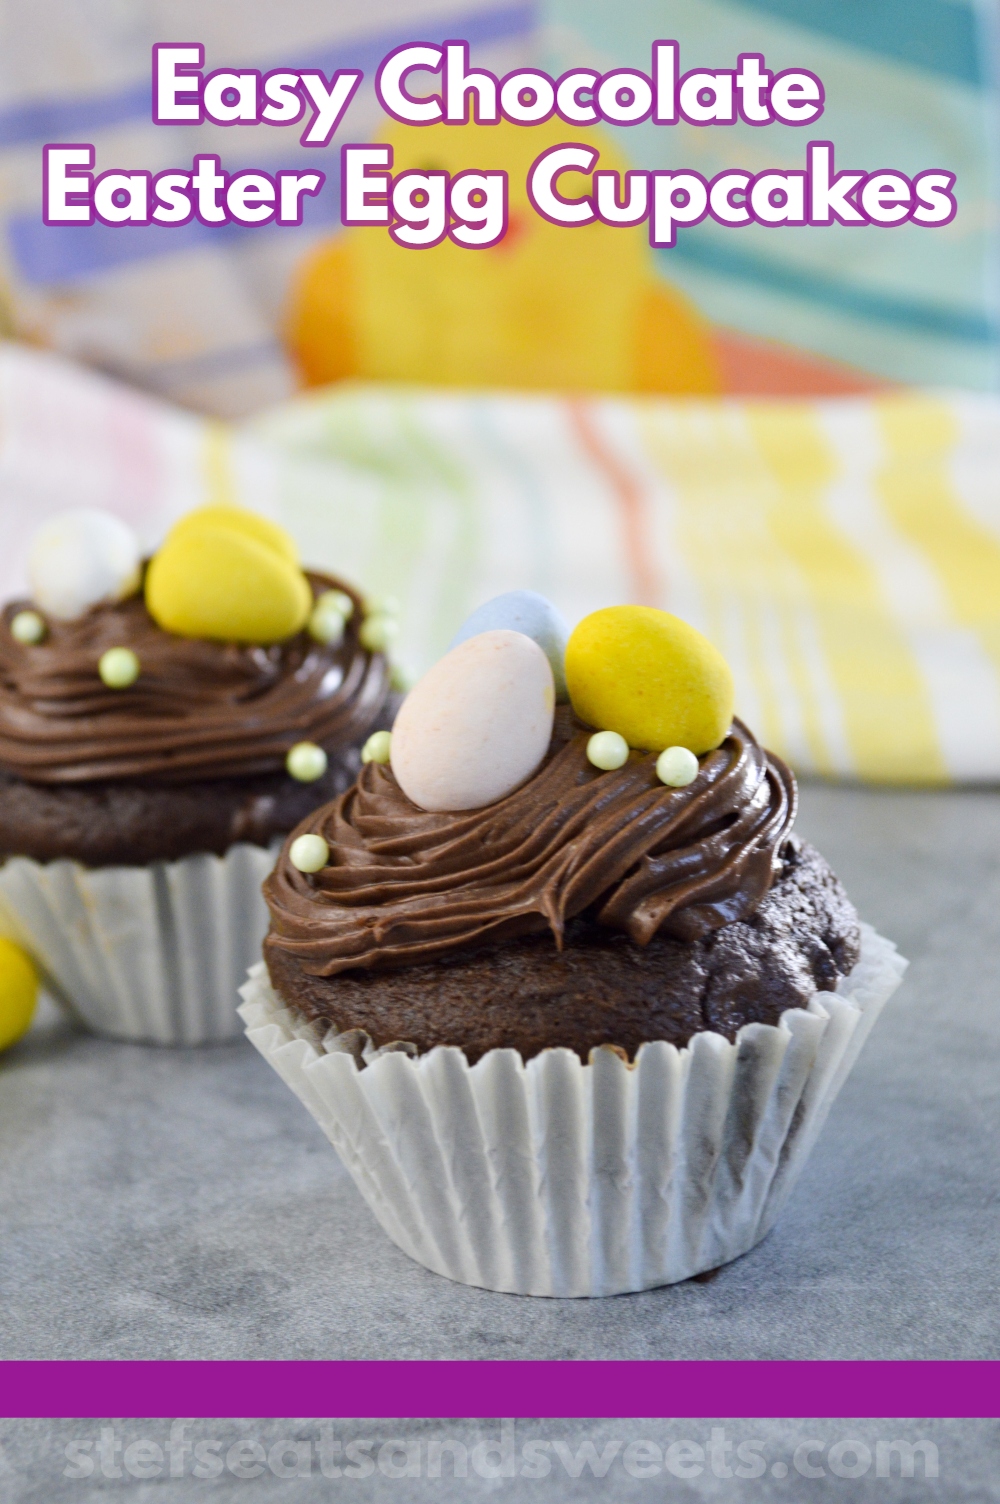 How to Make Chocolate Easter Egg Cupcakes 